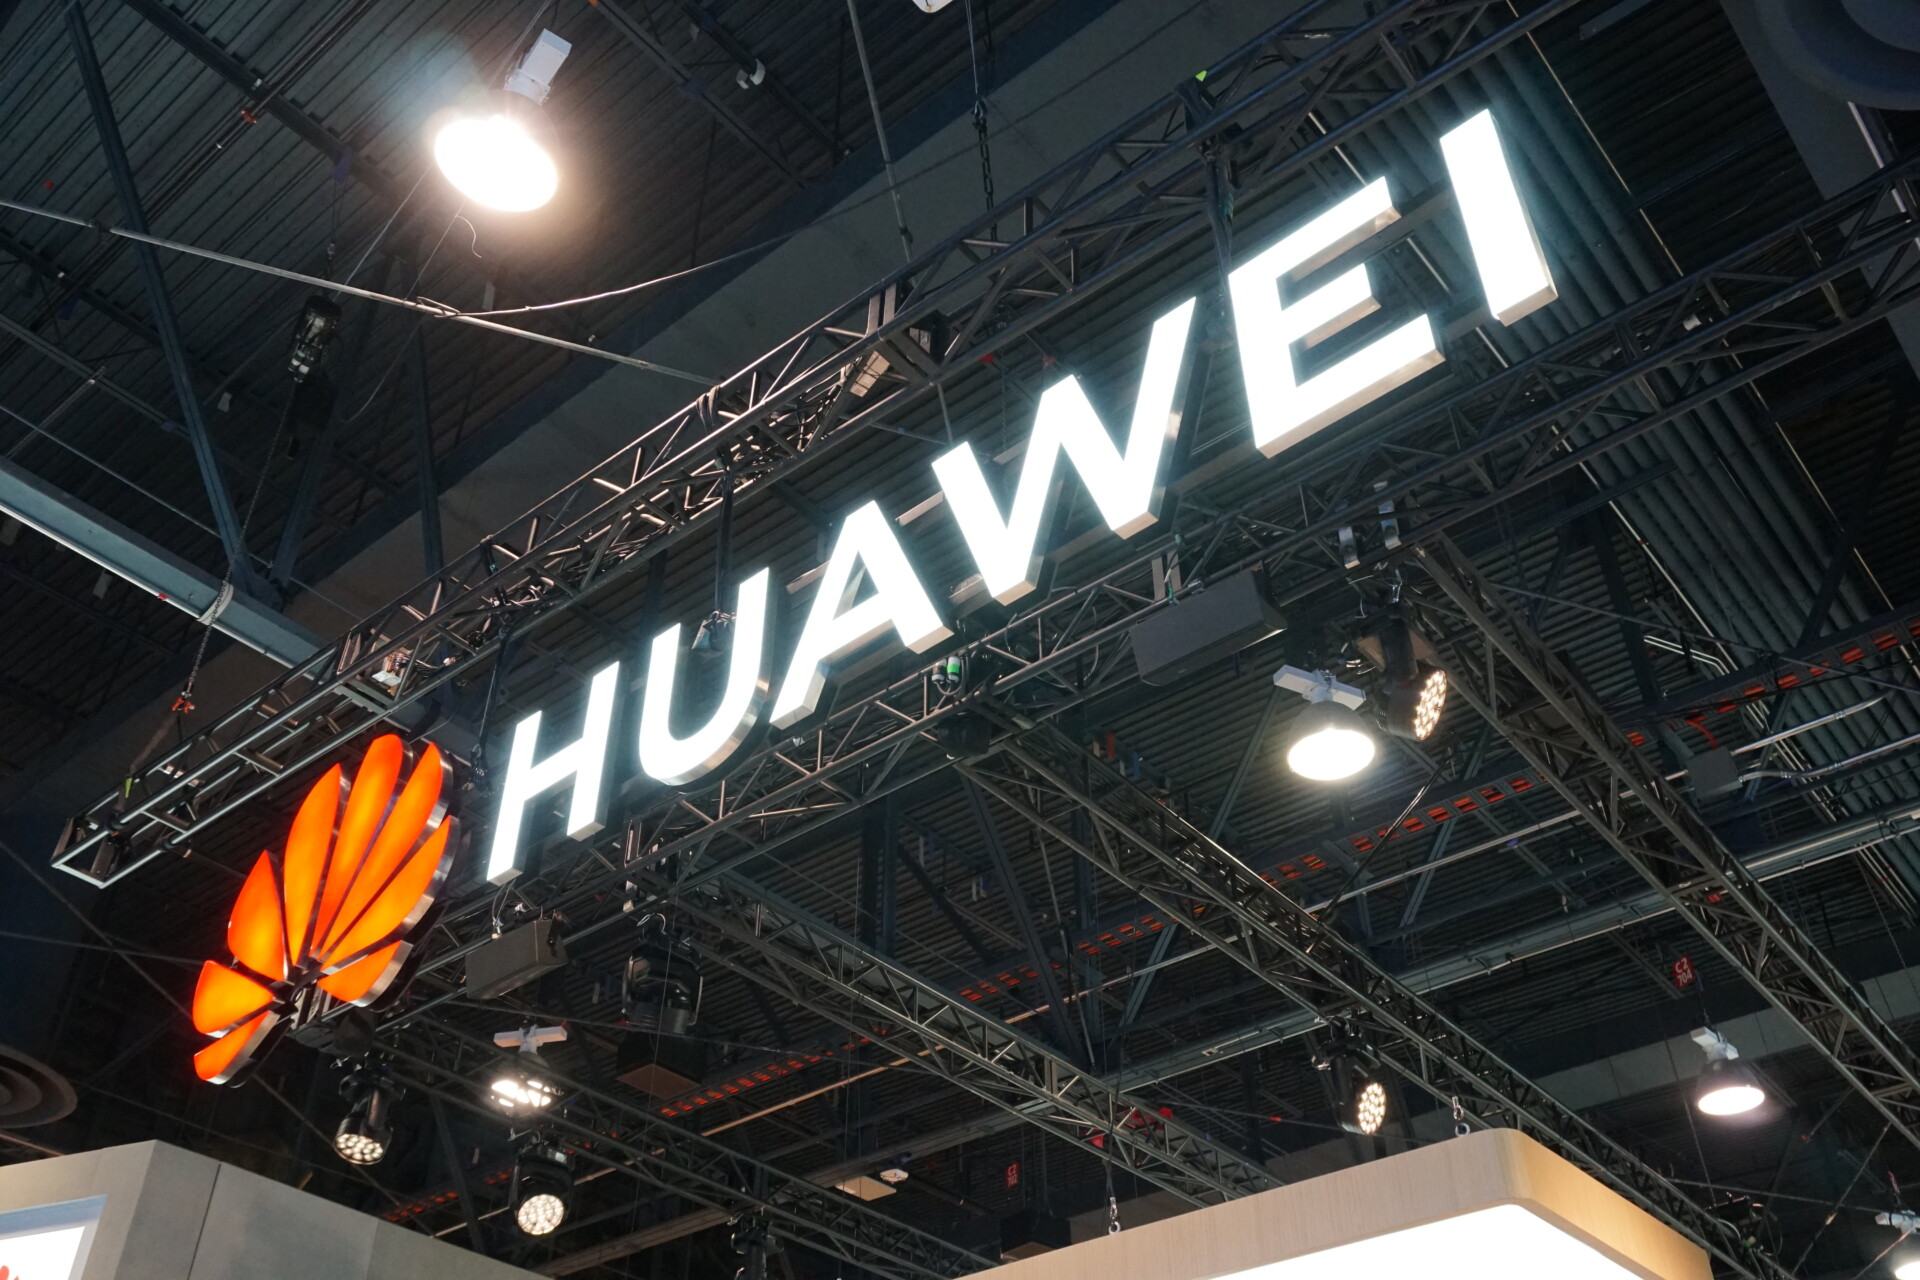 The HUAWEI logo at CES 2019.